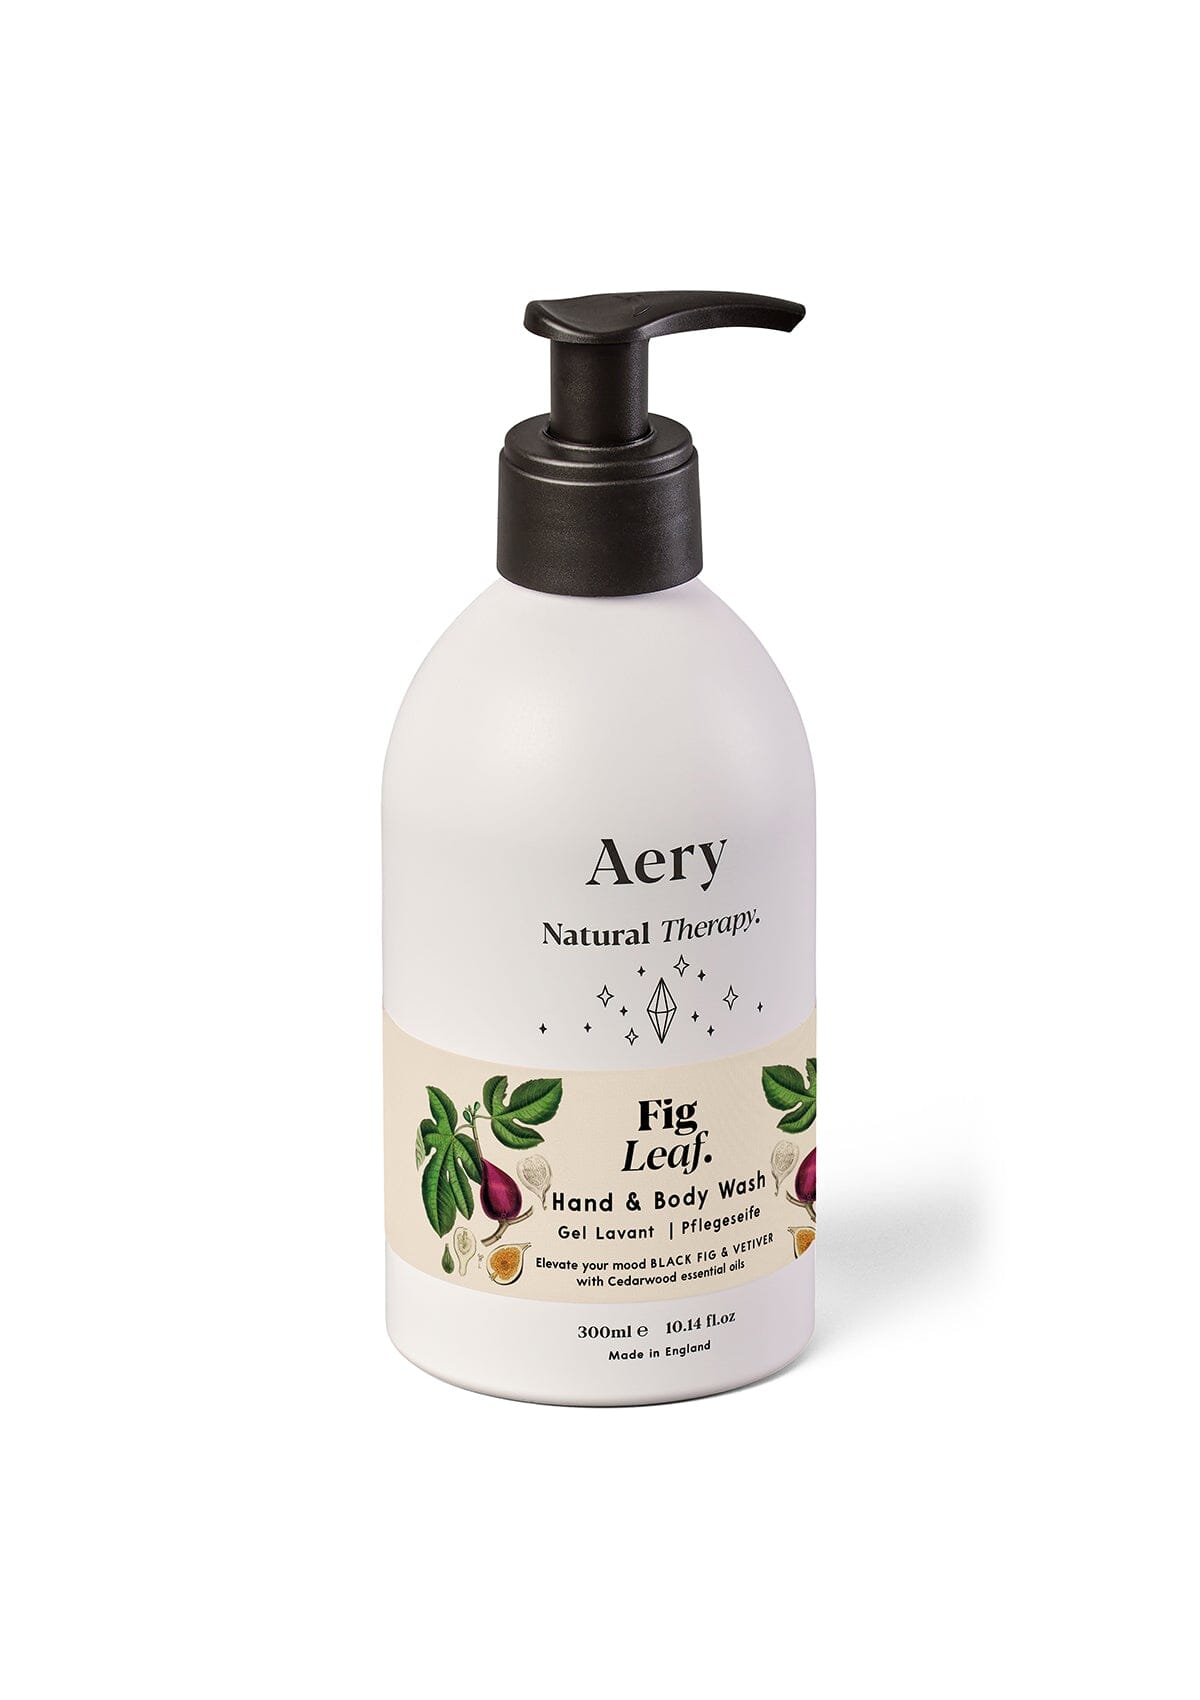 Cream Fig Leaf Hand and Body Wash by Aery displayed on white background 